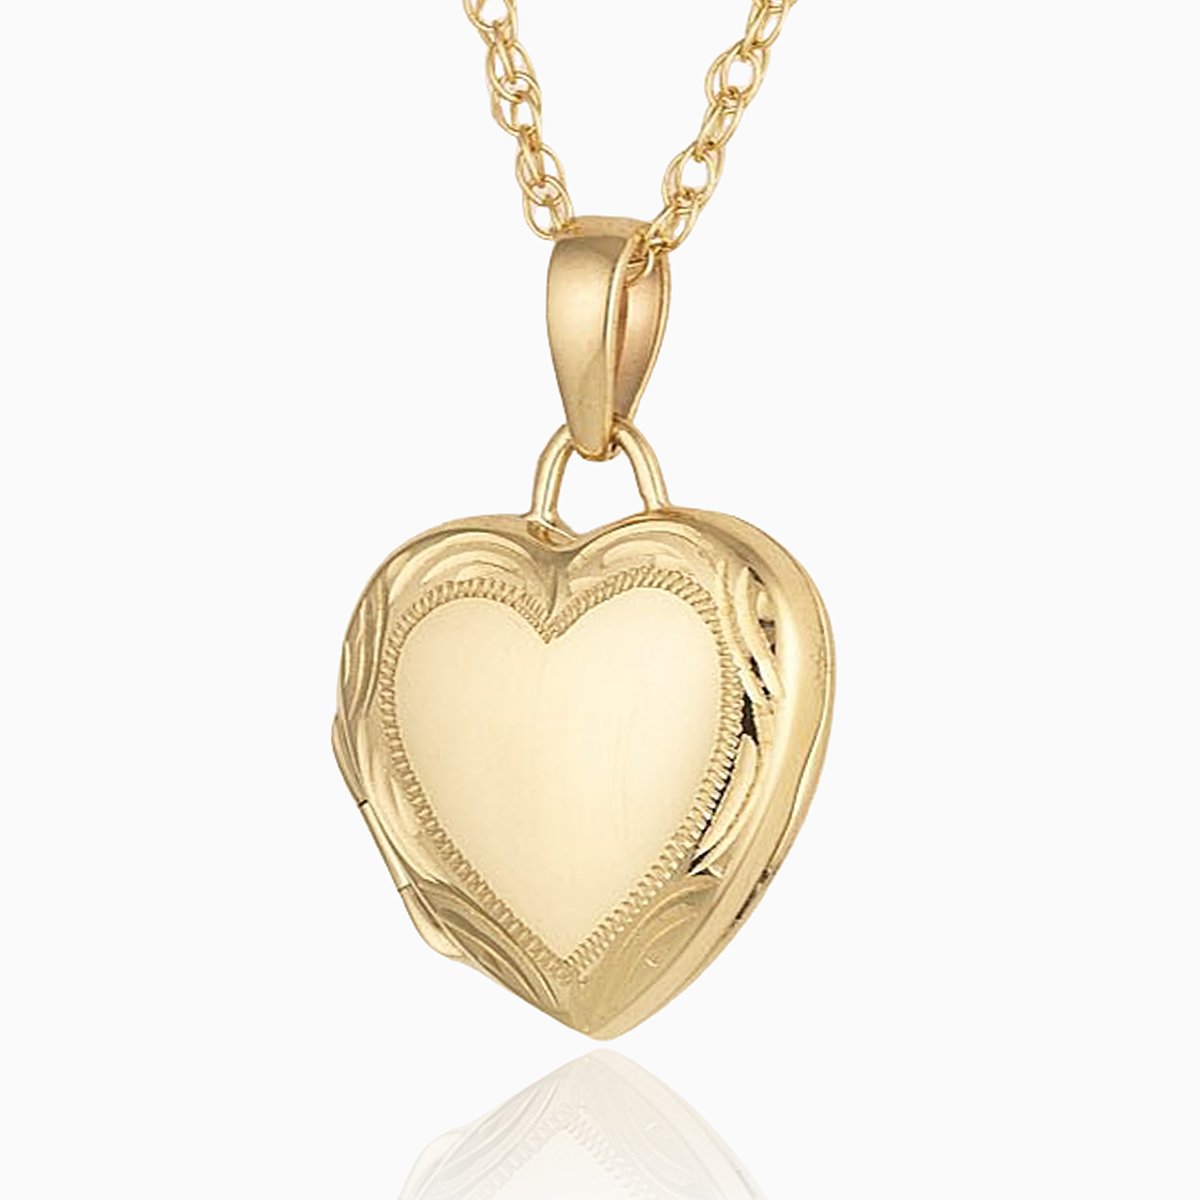 9 ct gold heart lcoekt with an engraved border on a 9 ct gold rope chain